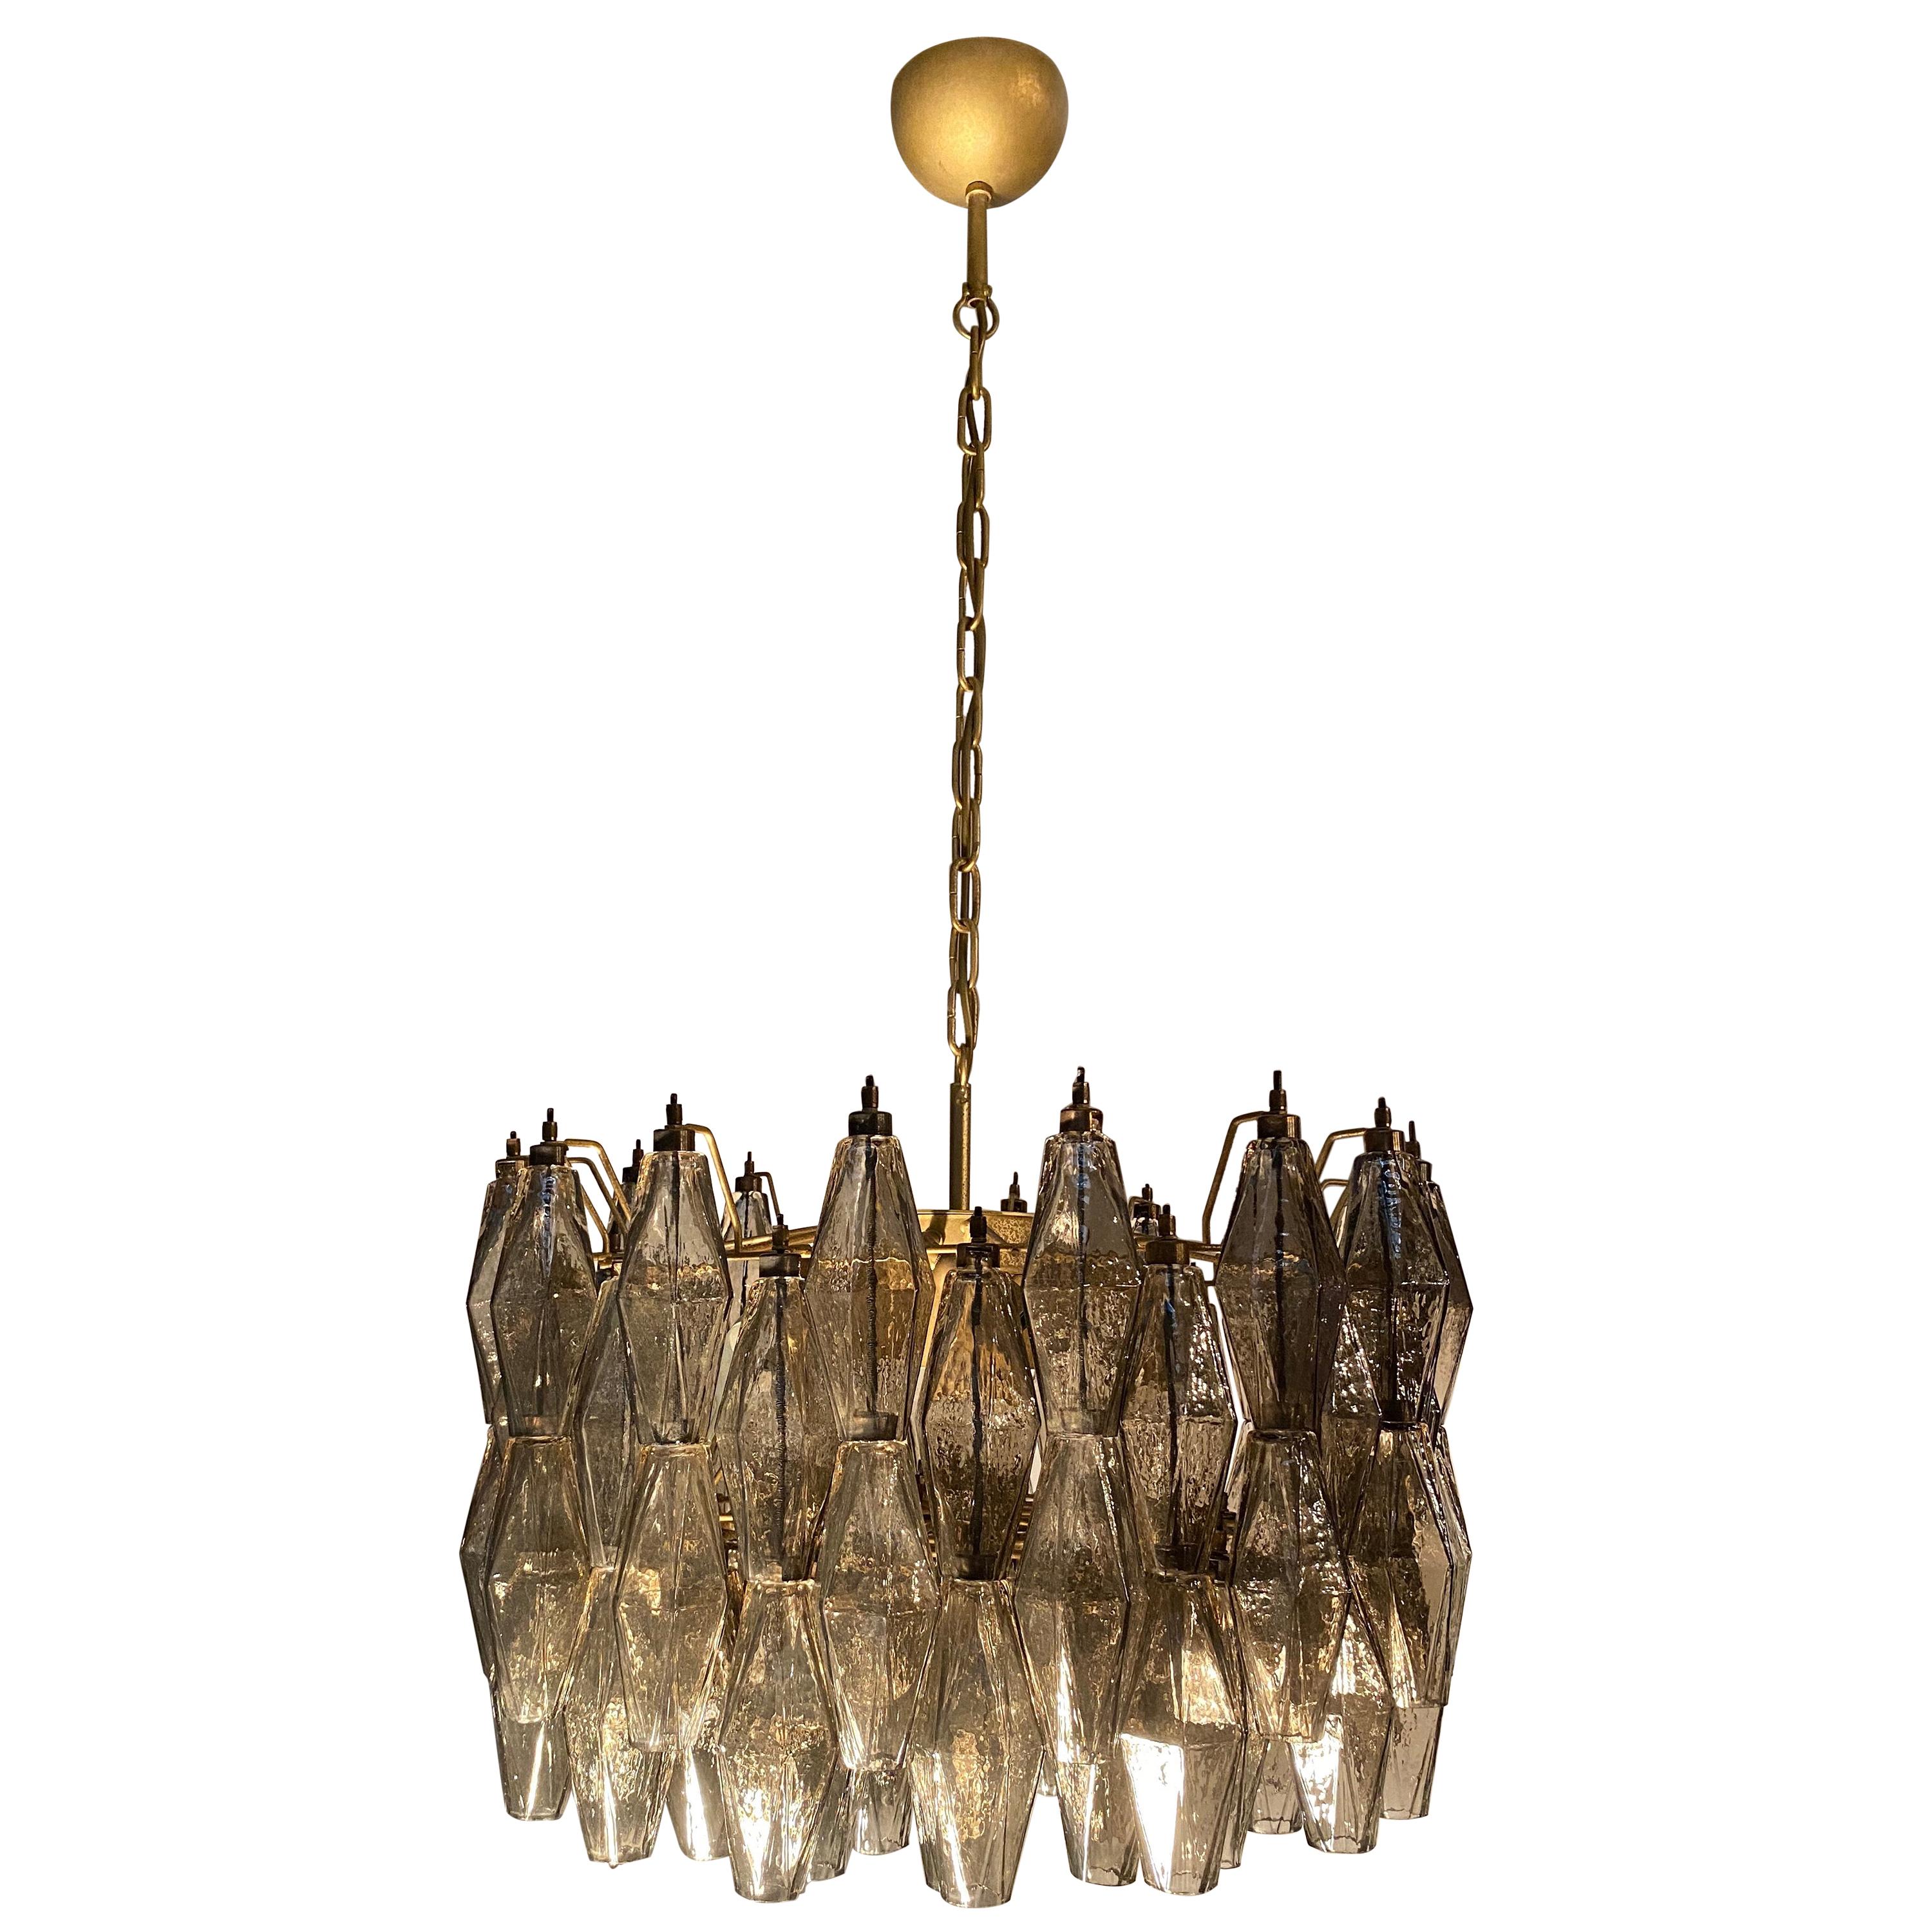 The chandelier consists of 103 hand blown grey 